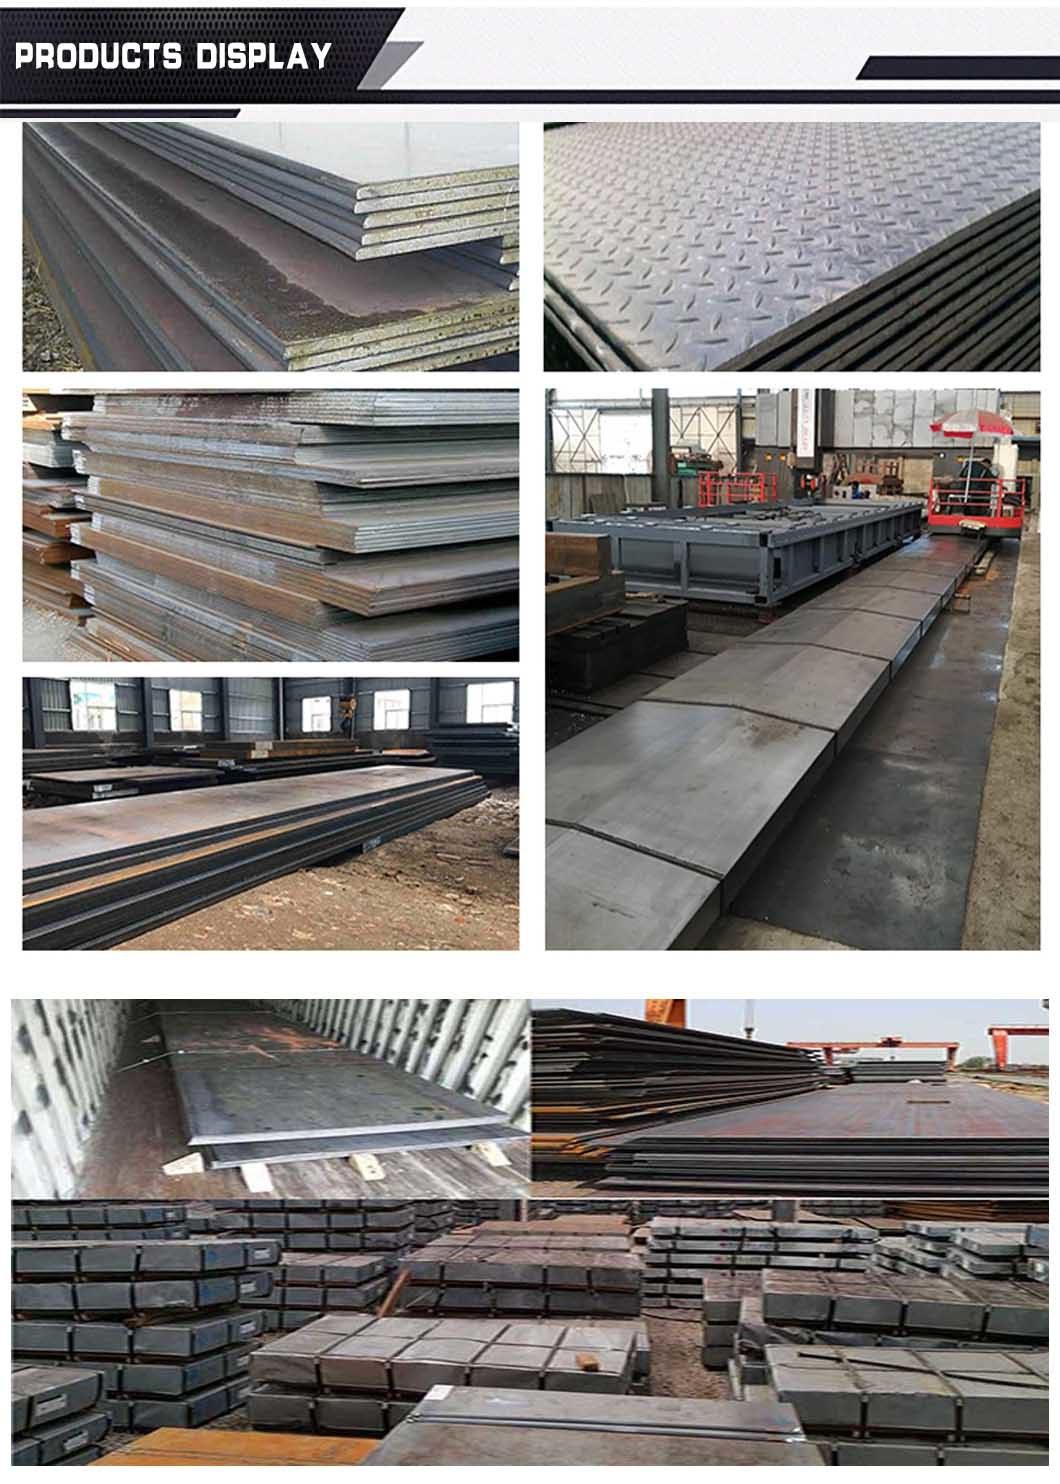 High Quality Black Iron Sheet Ms Sheet A36 Hot Rolled Mild Carbon Steel Plate Ss400 Price Per Kg